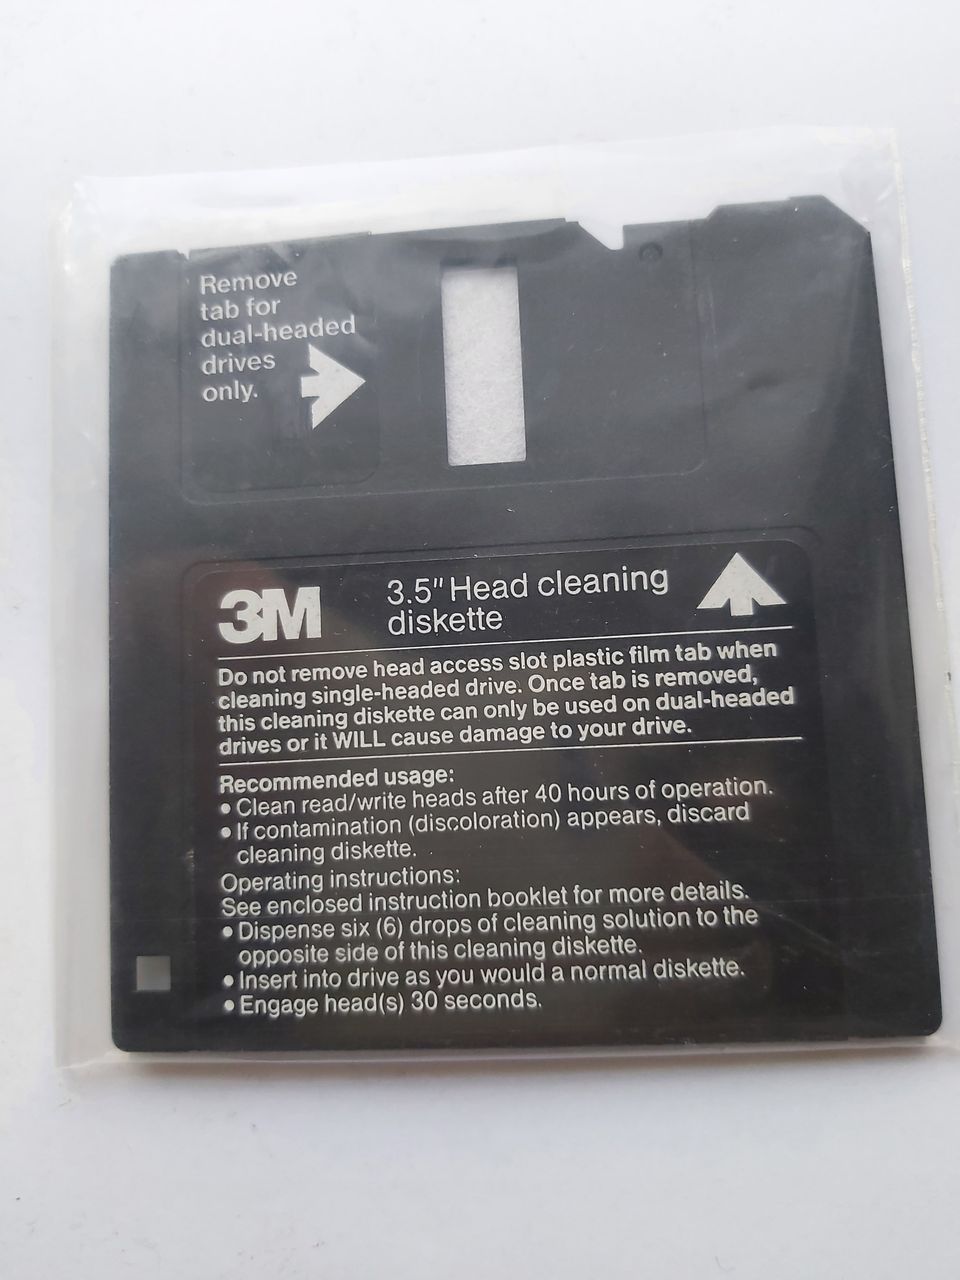 Head cleaning diskette